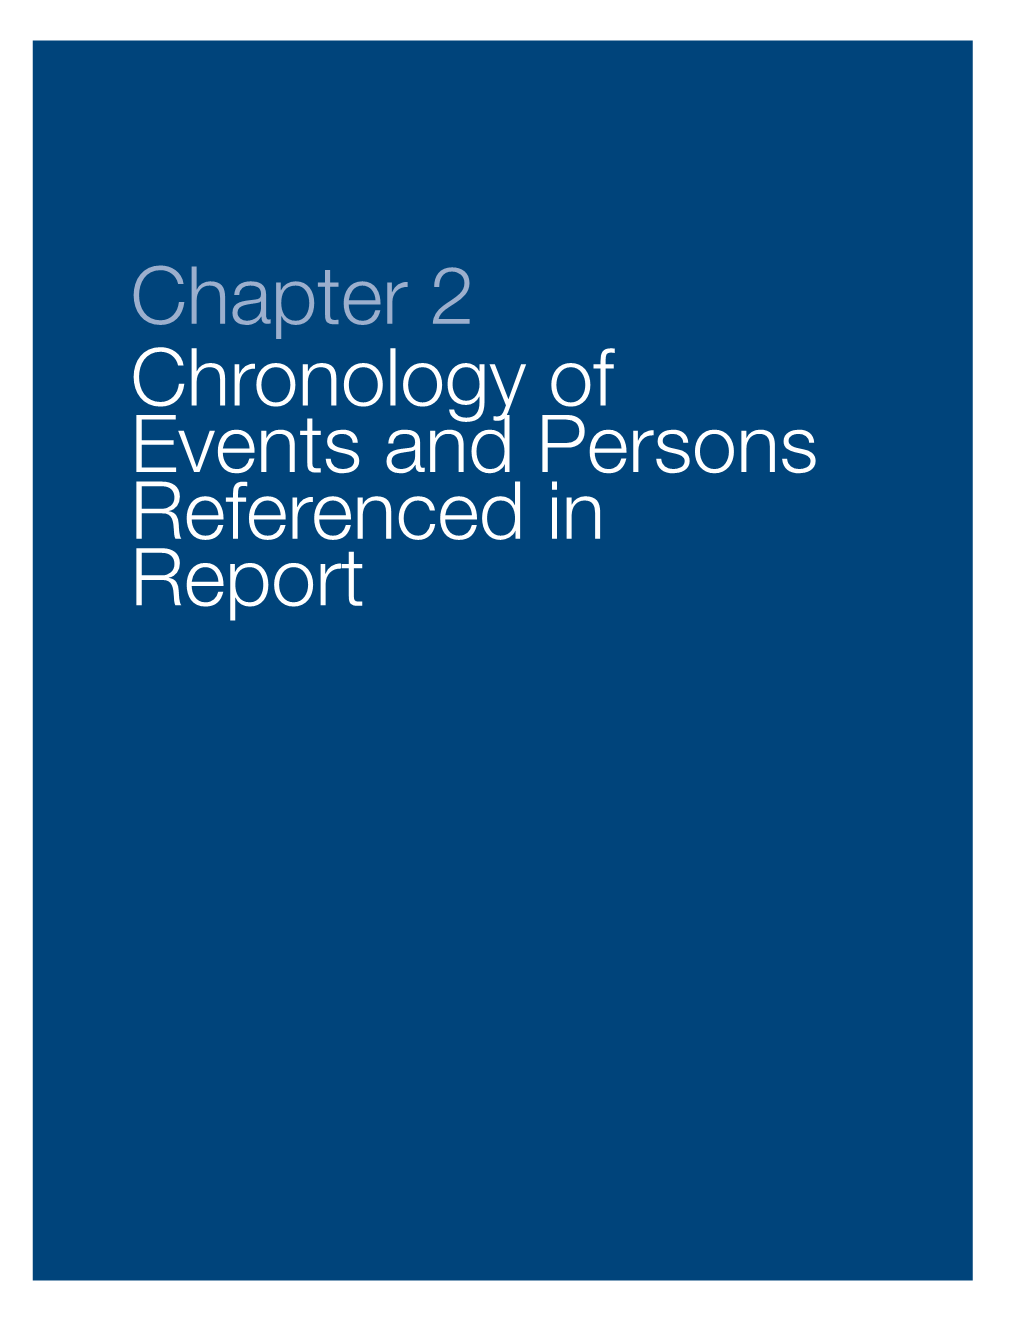 Chapter 2 Chronology of Events and Persons Referenced in Report Events Prior to Trial